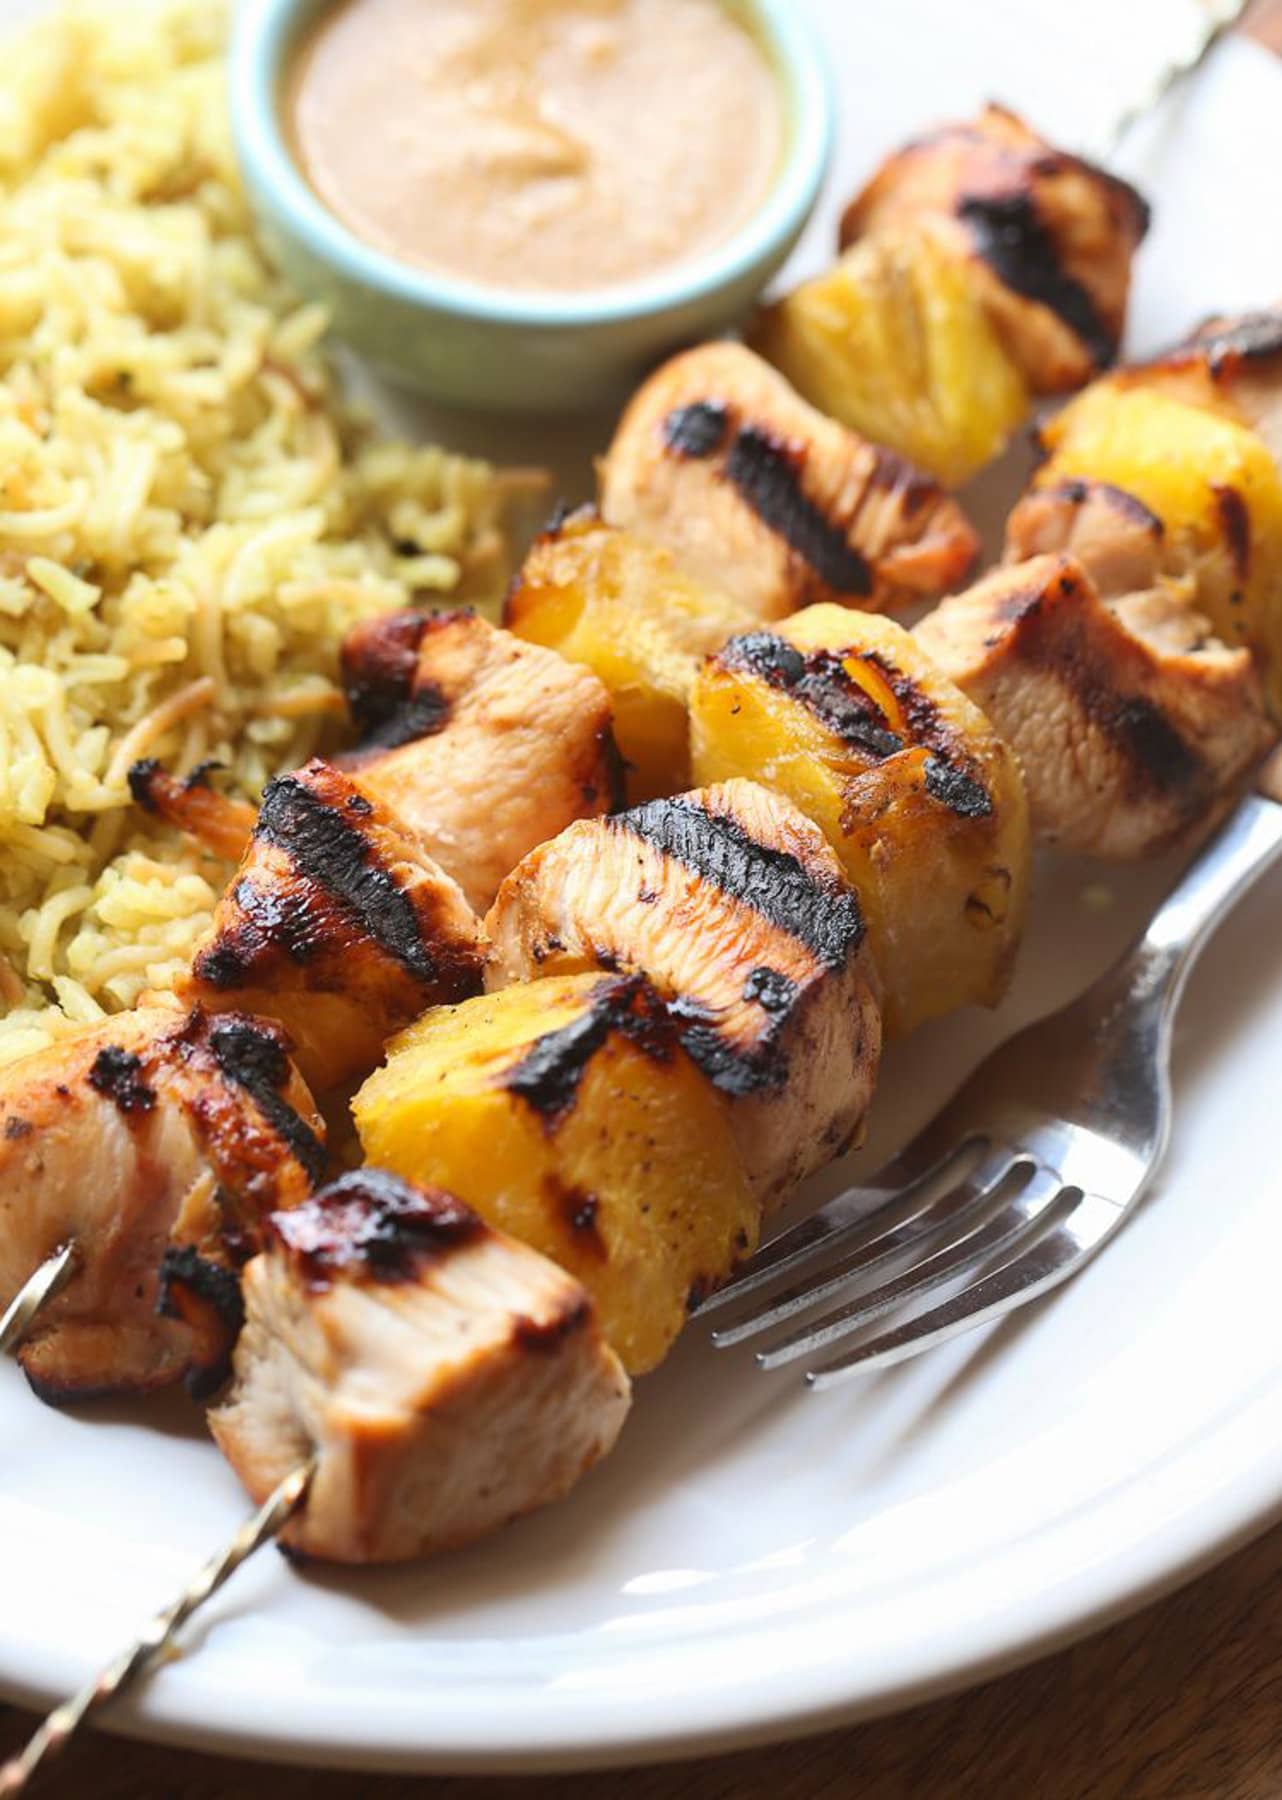 Chicken skewers served with rice